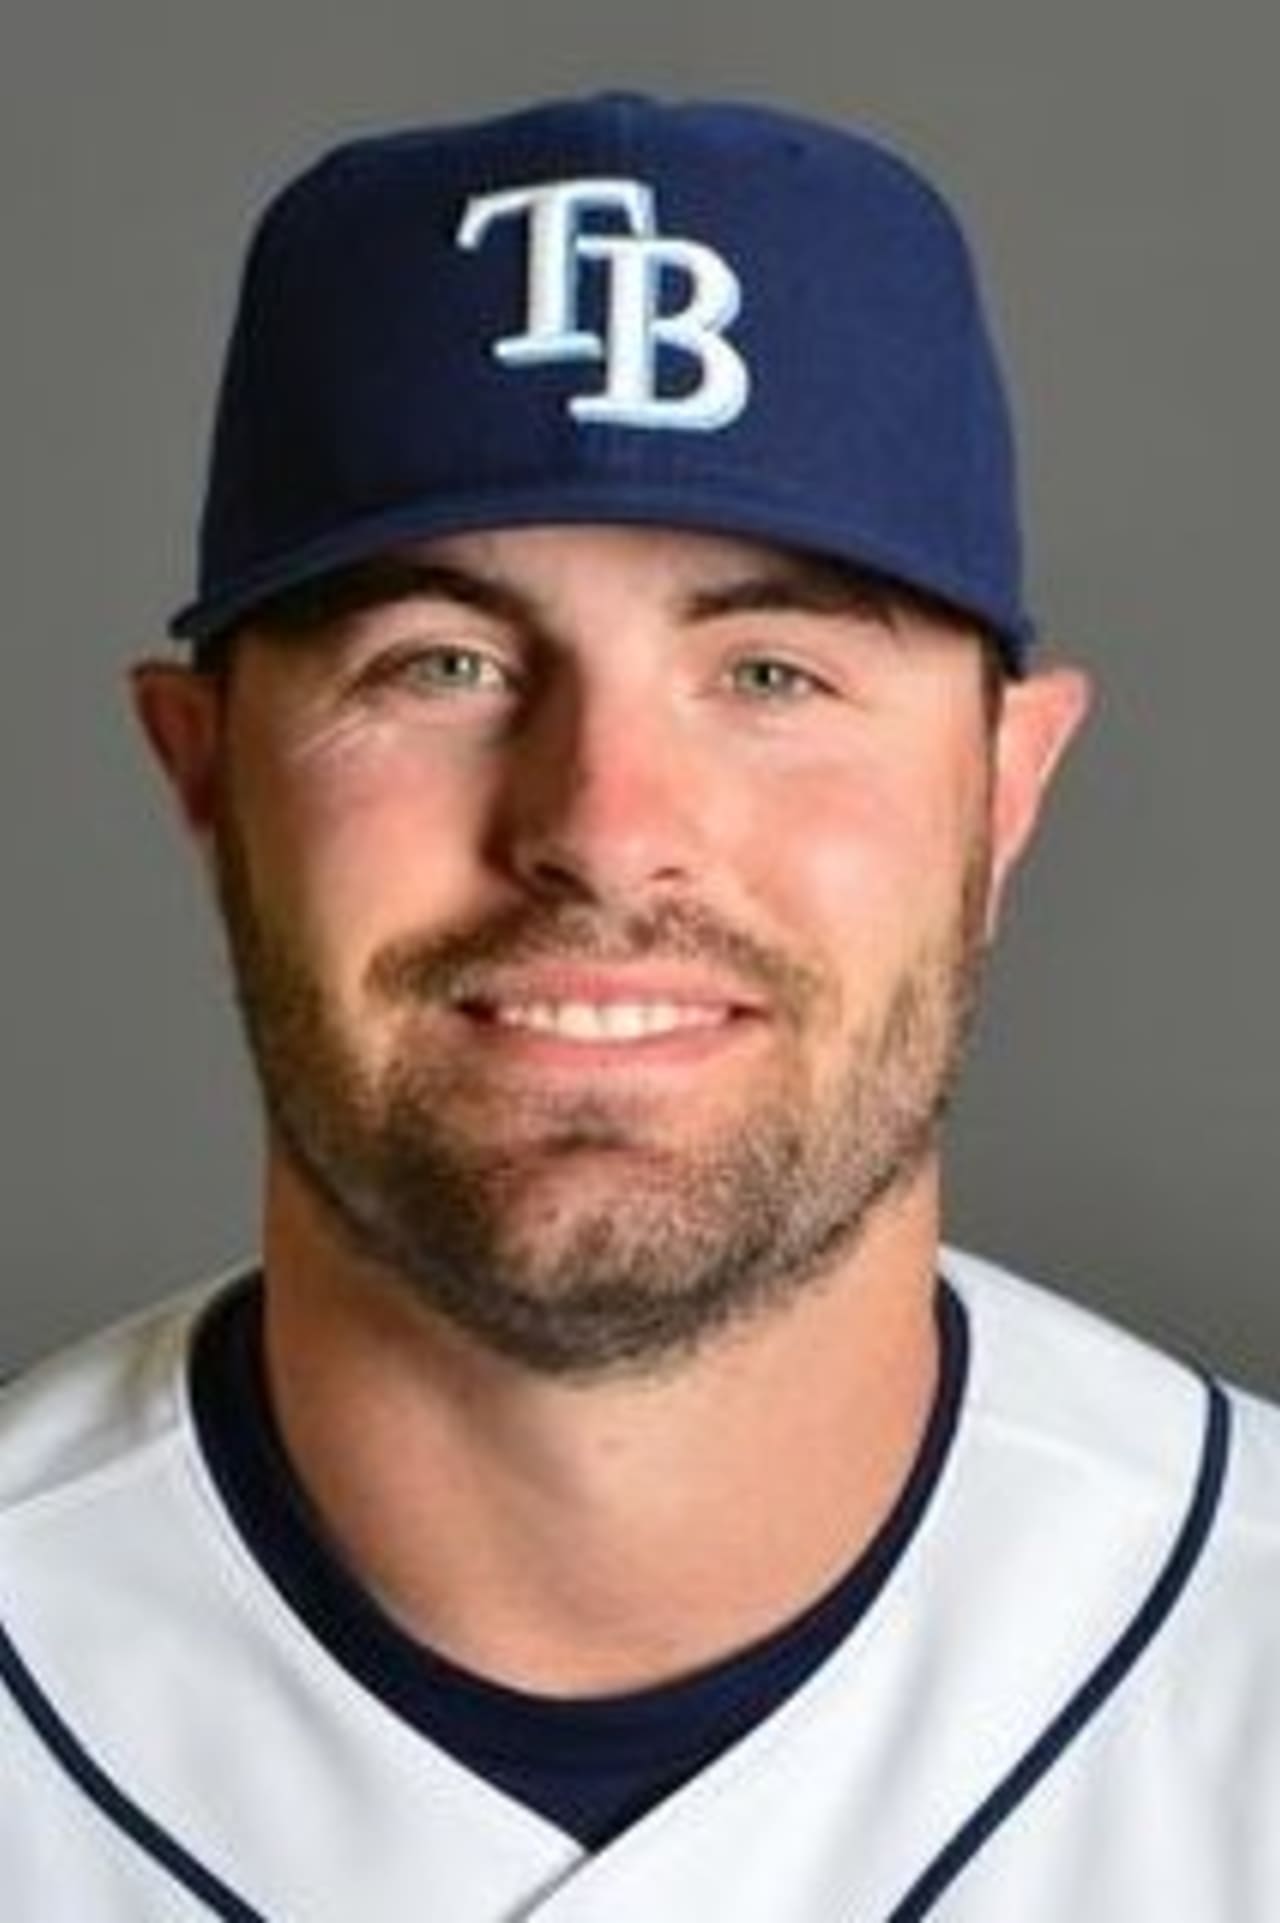 New Canaan native Curt Casali suffered a concussion and is likely out for the rest of the Major League Baseball season. 